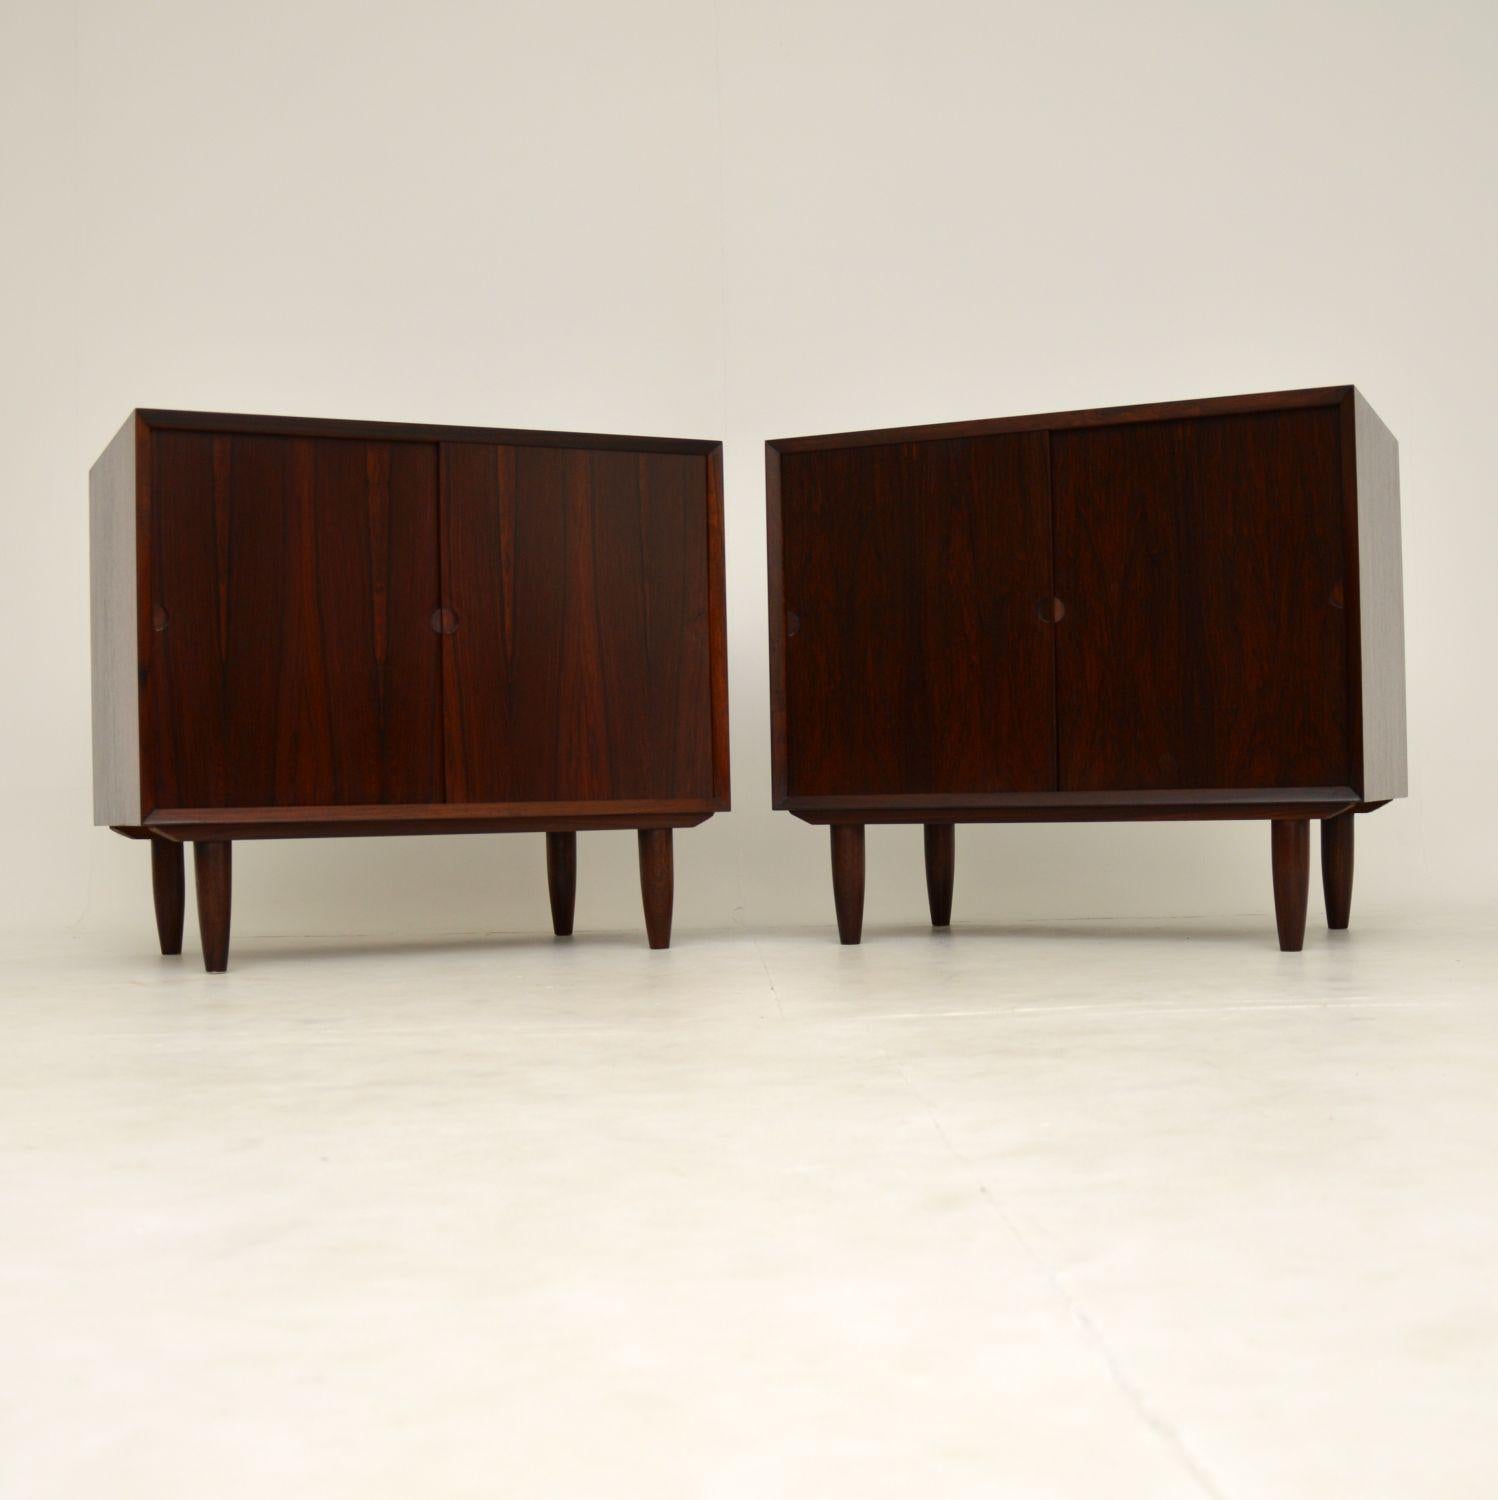 A stunning pair of vintage Danish cabinets made in Denmark in the 1960’s. They were designed by Poul Cadovius.

They are of absolutely amazing quality, with beautiful wood grain patters throughout. Even the interiors have gorgeous wood grain, on